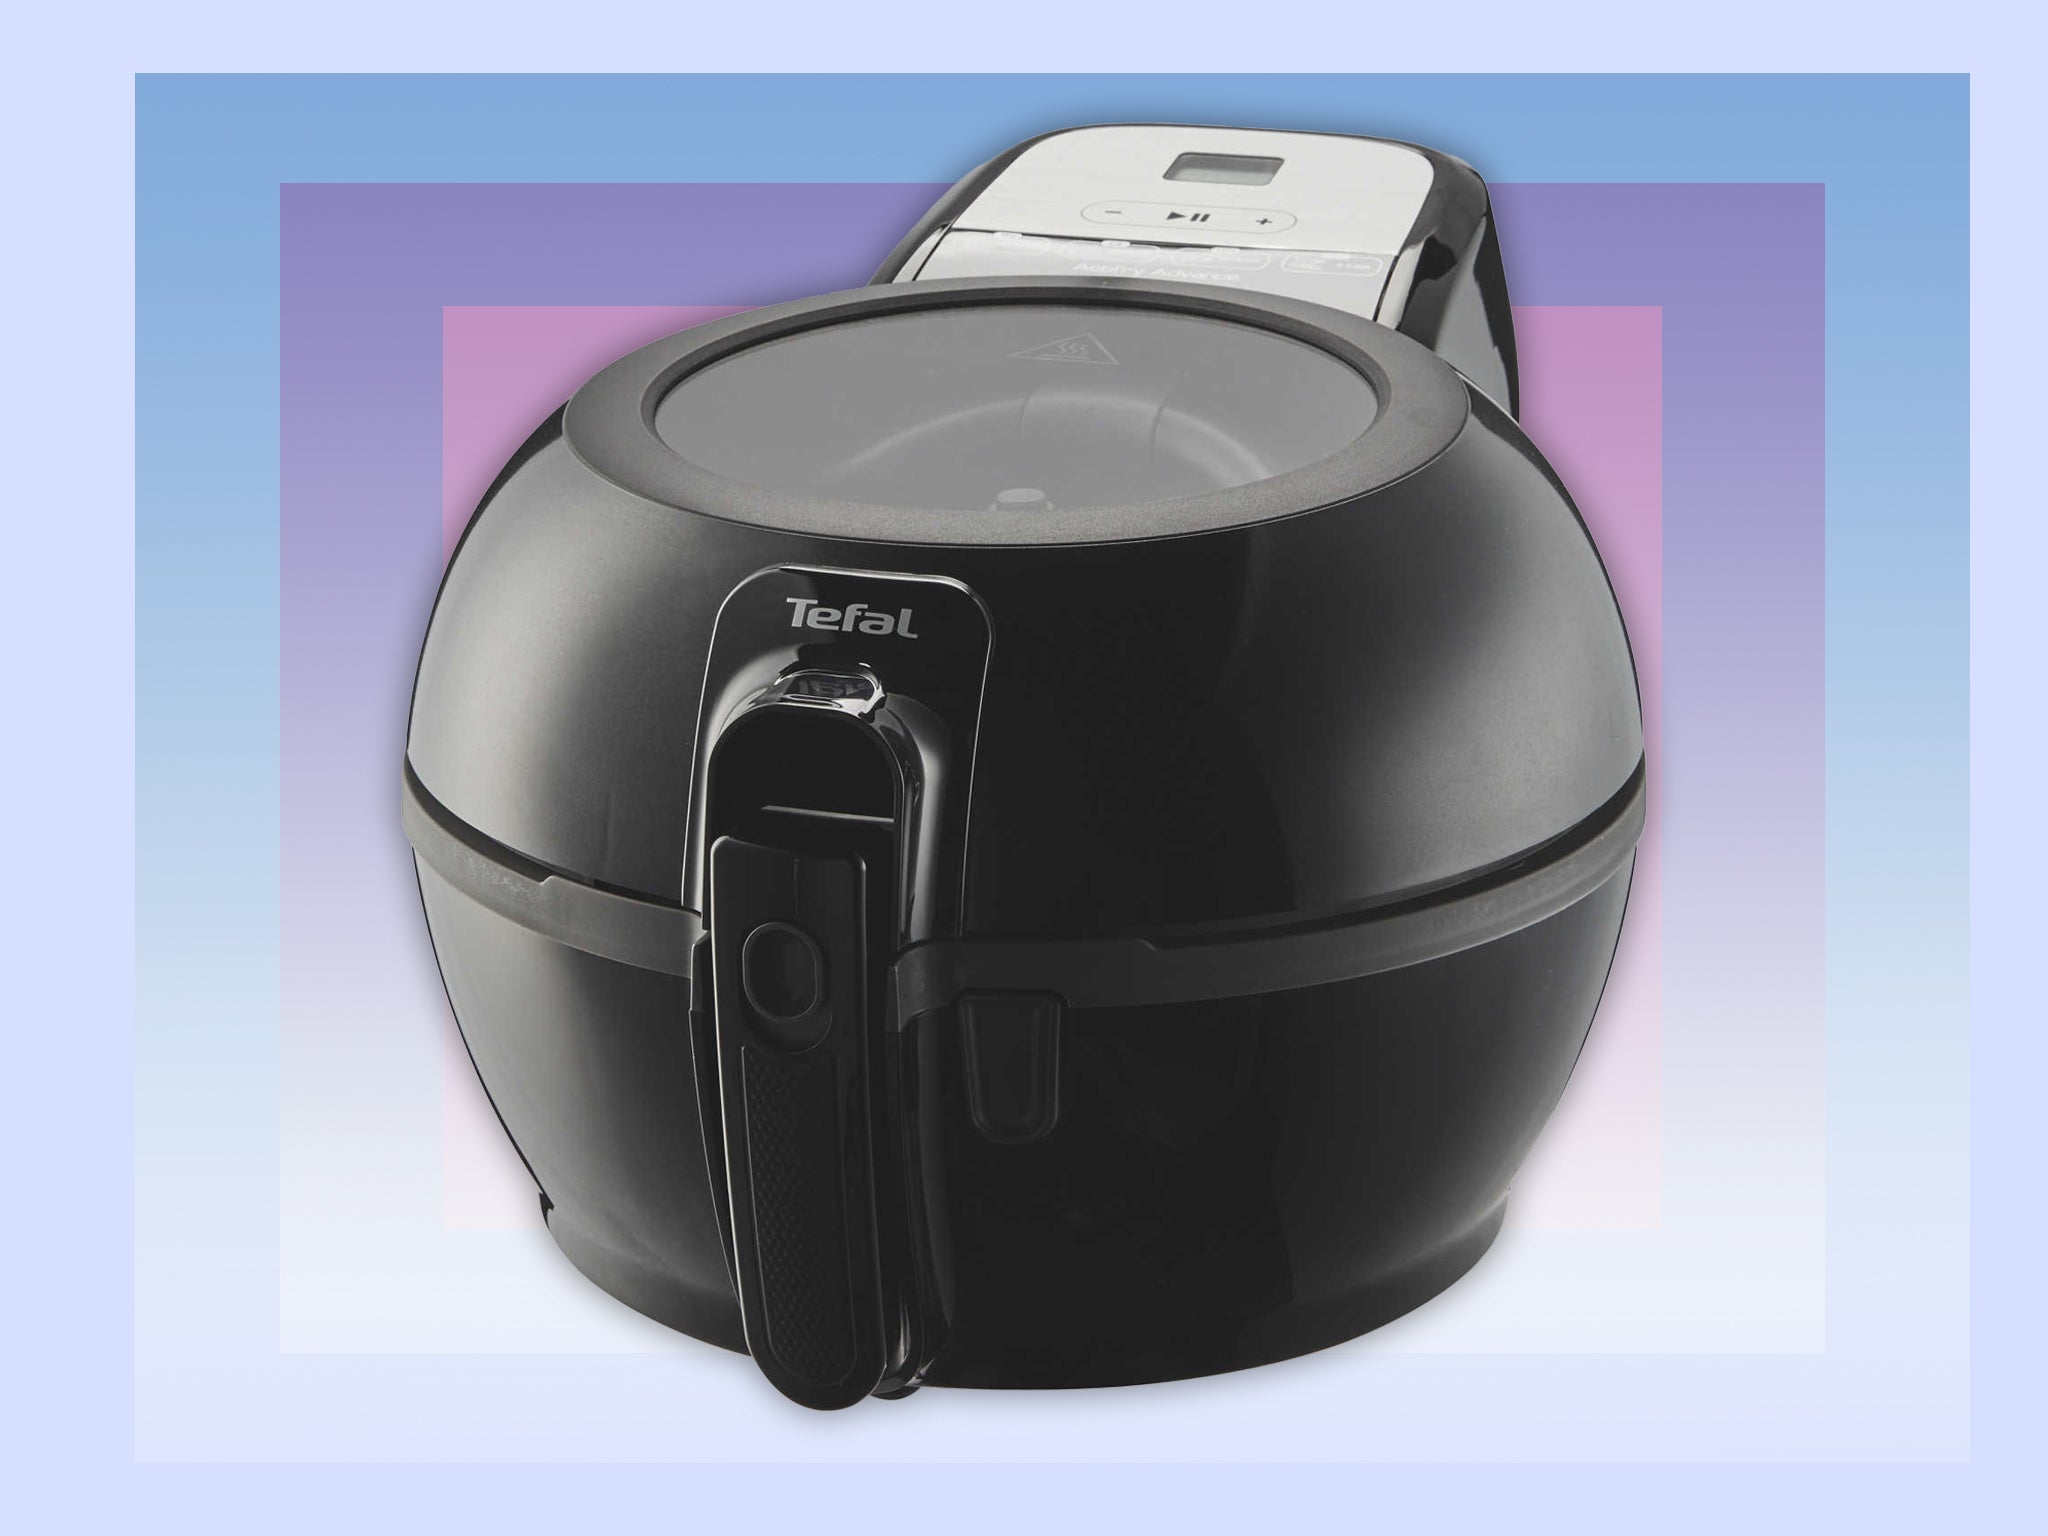 https://static.independent.co.uk/2023/02/06/12/Tefal%20Actifry%20Advance%20Indybest%20copy.jpg